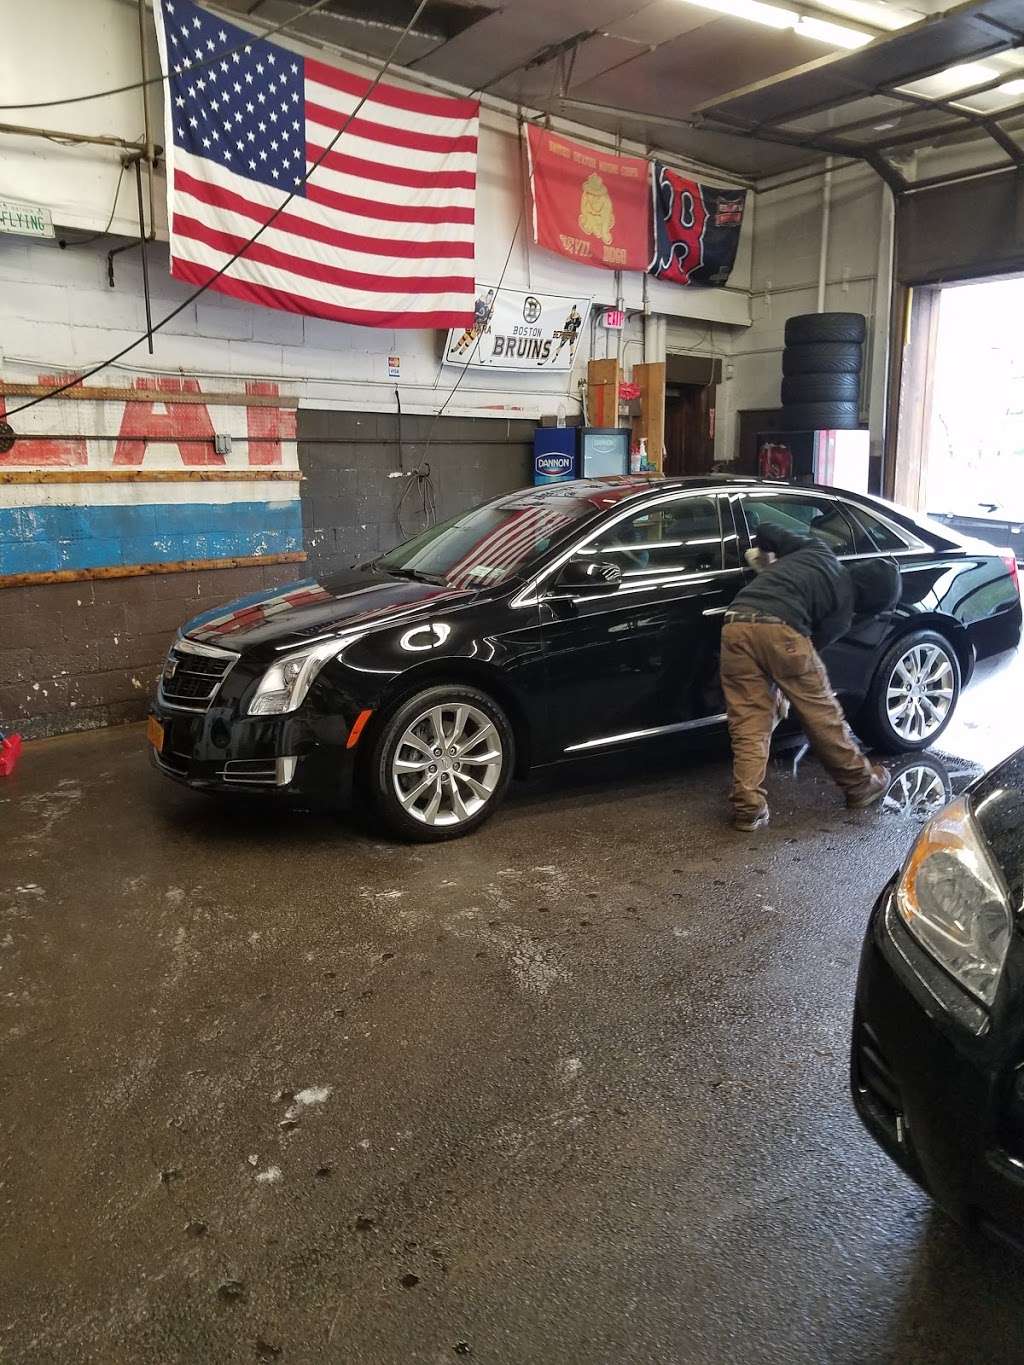 Johnny’s Spotless Carwash and Detailing | 401 Union St, Holbrook, MA 02343 | Phone: (781) 202-6882